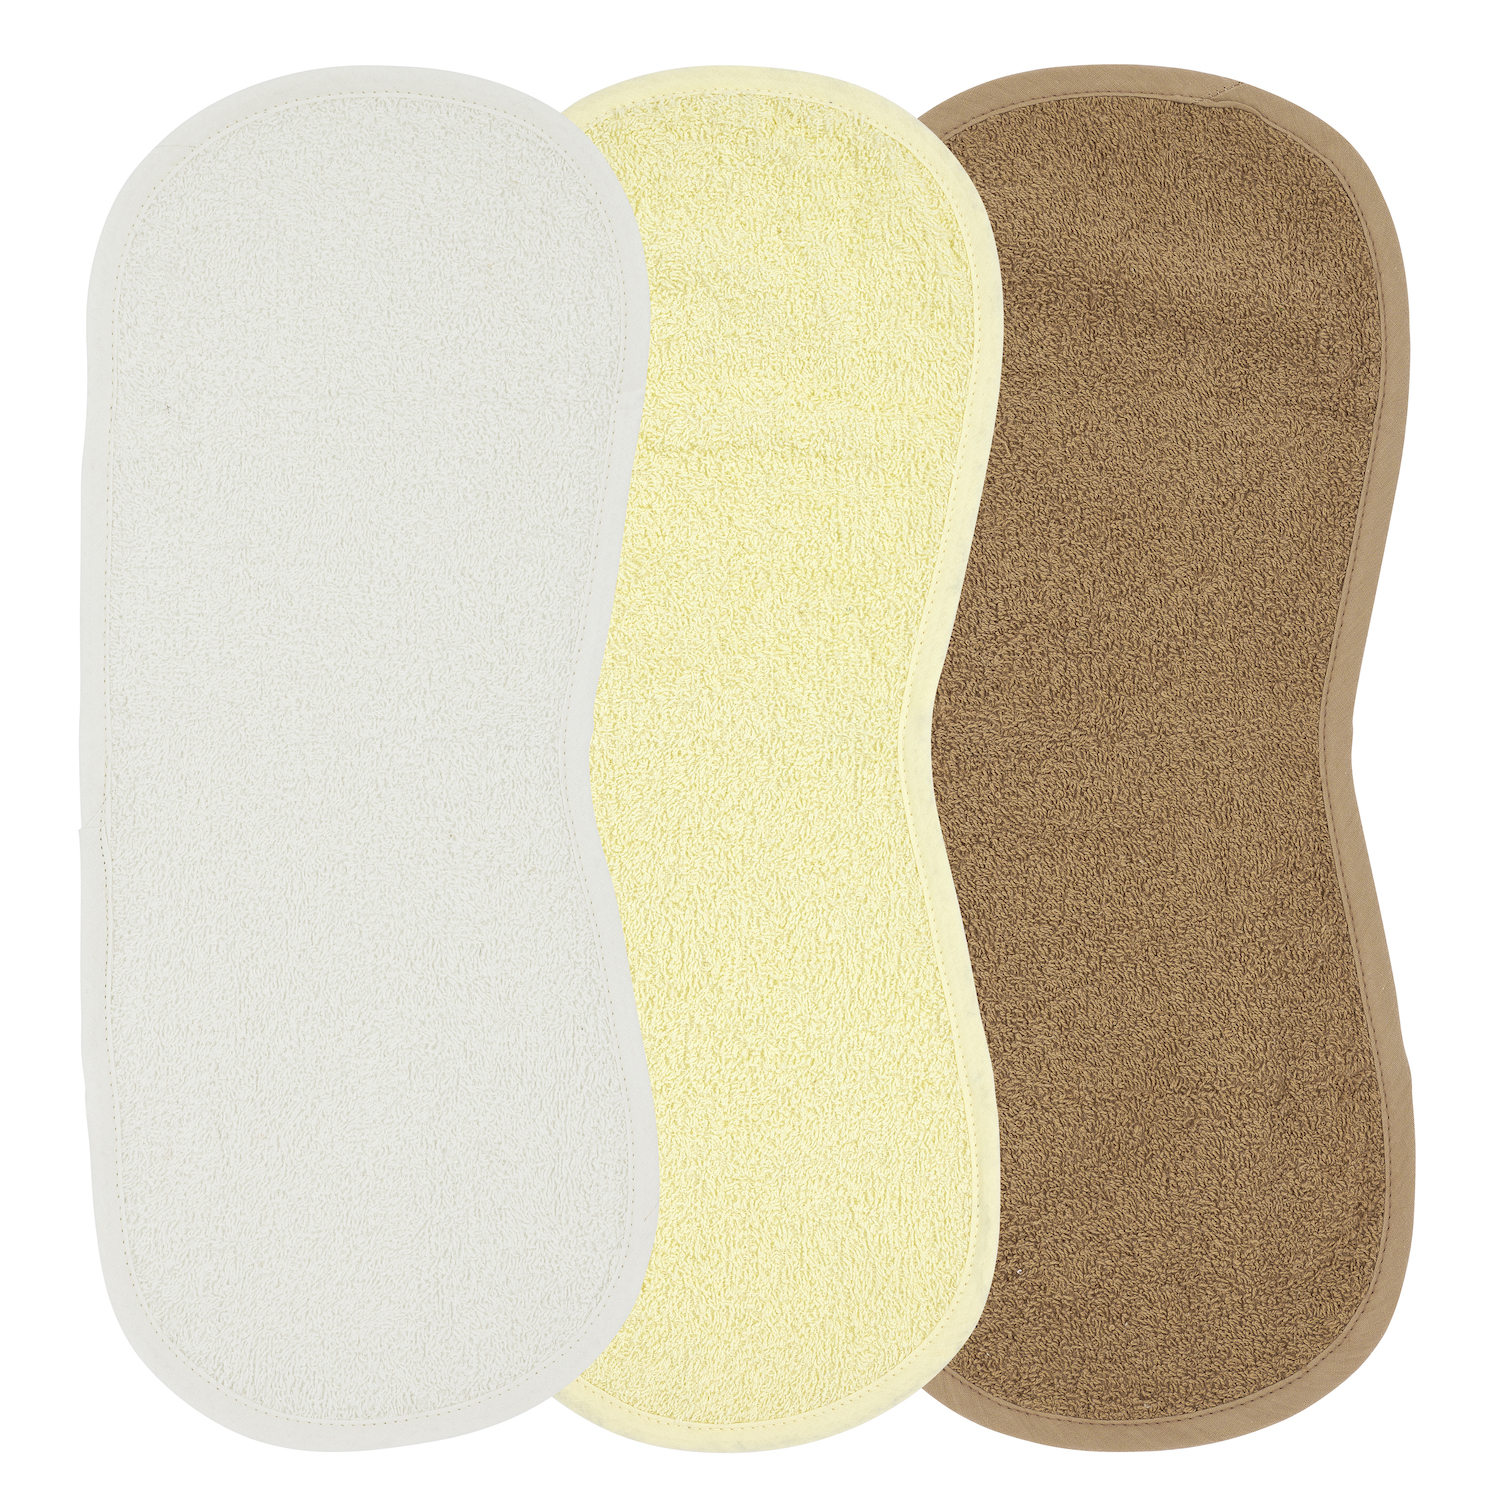 Spucktuch 3er pack frottee Uni - offwhite/soft yellow/toffee - 53x20cm